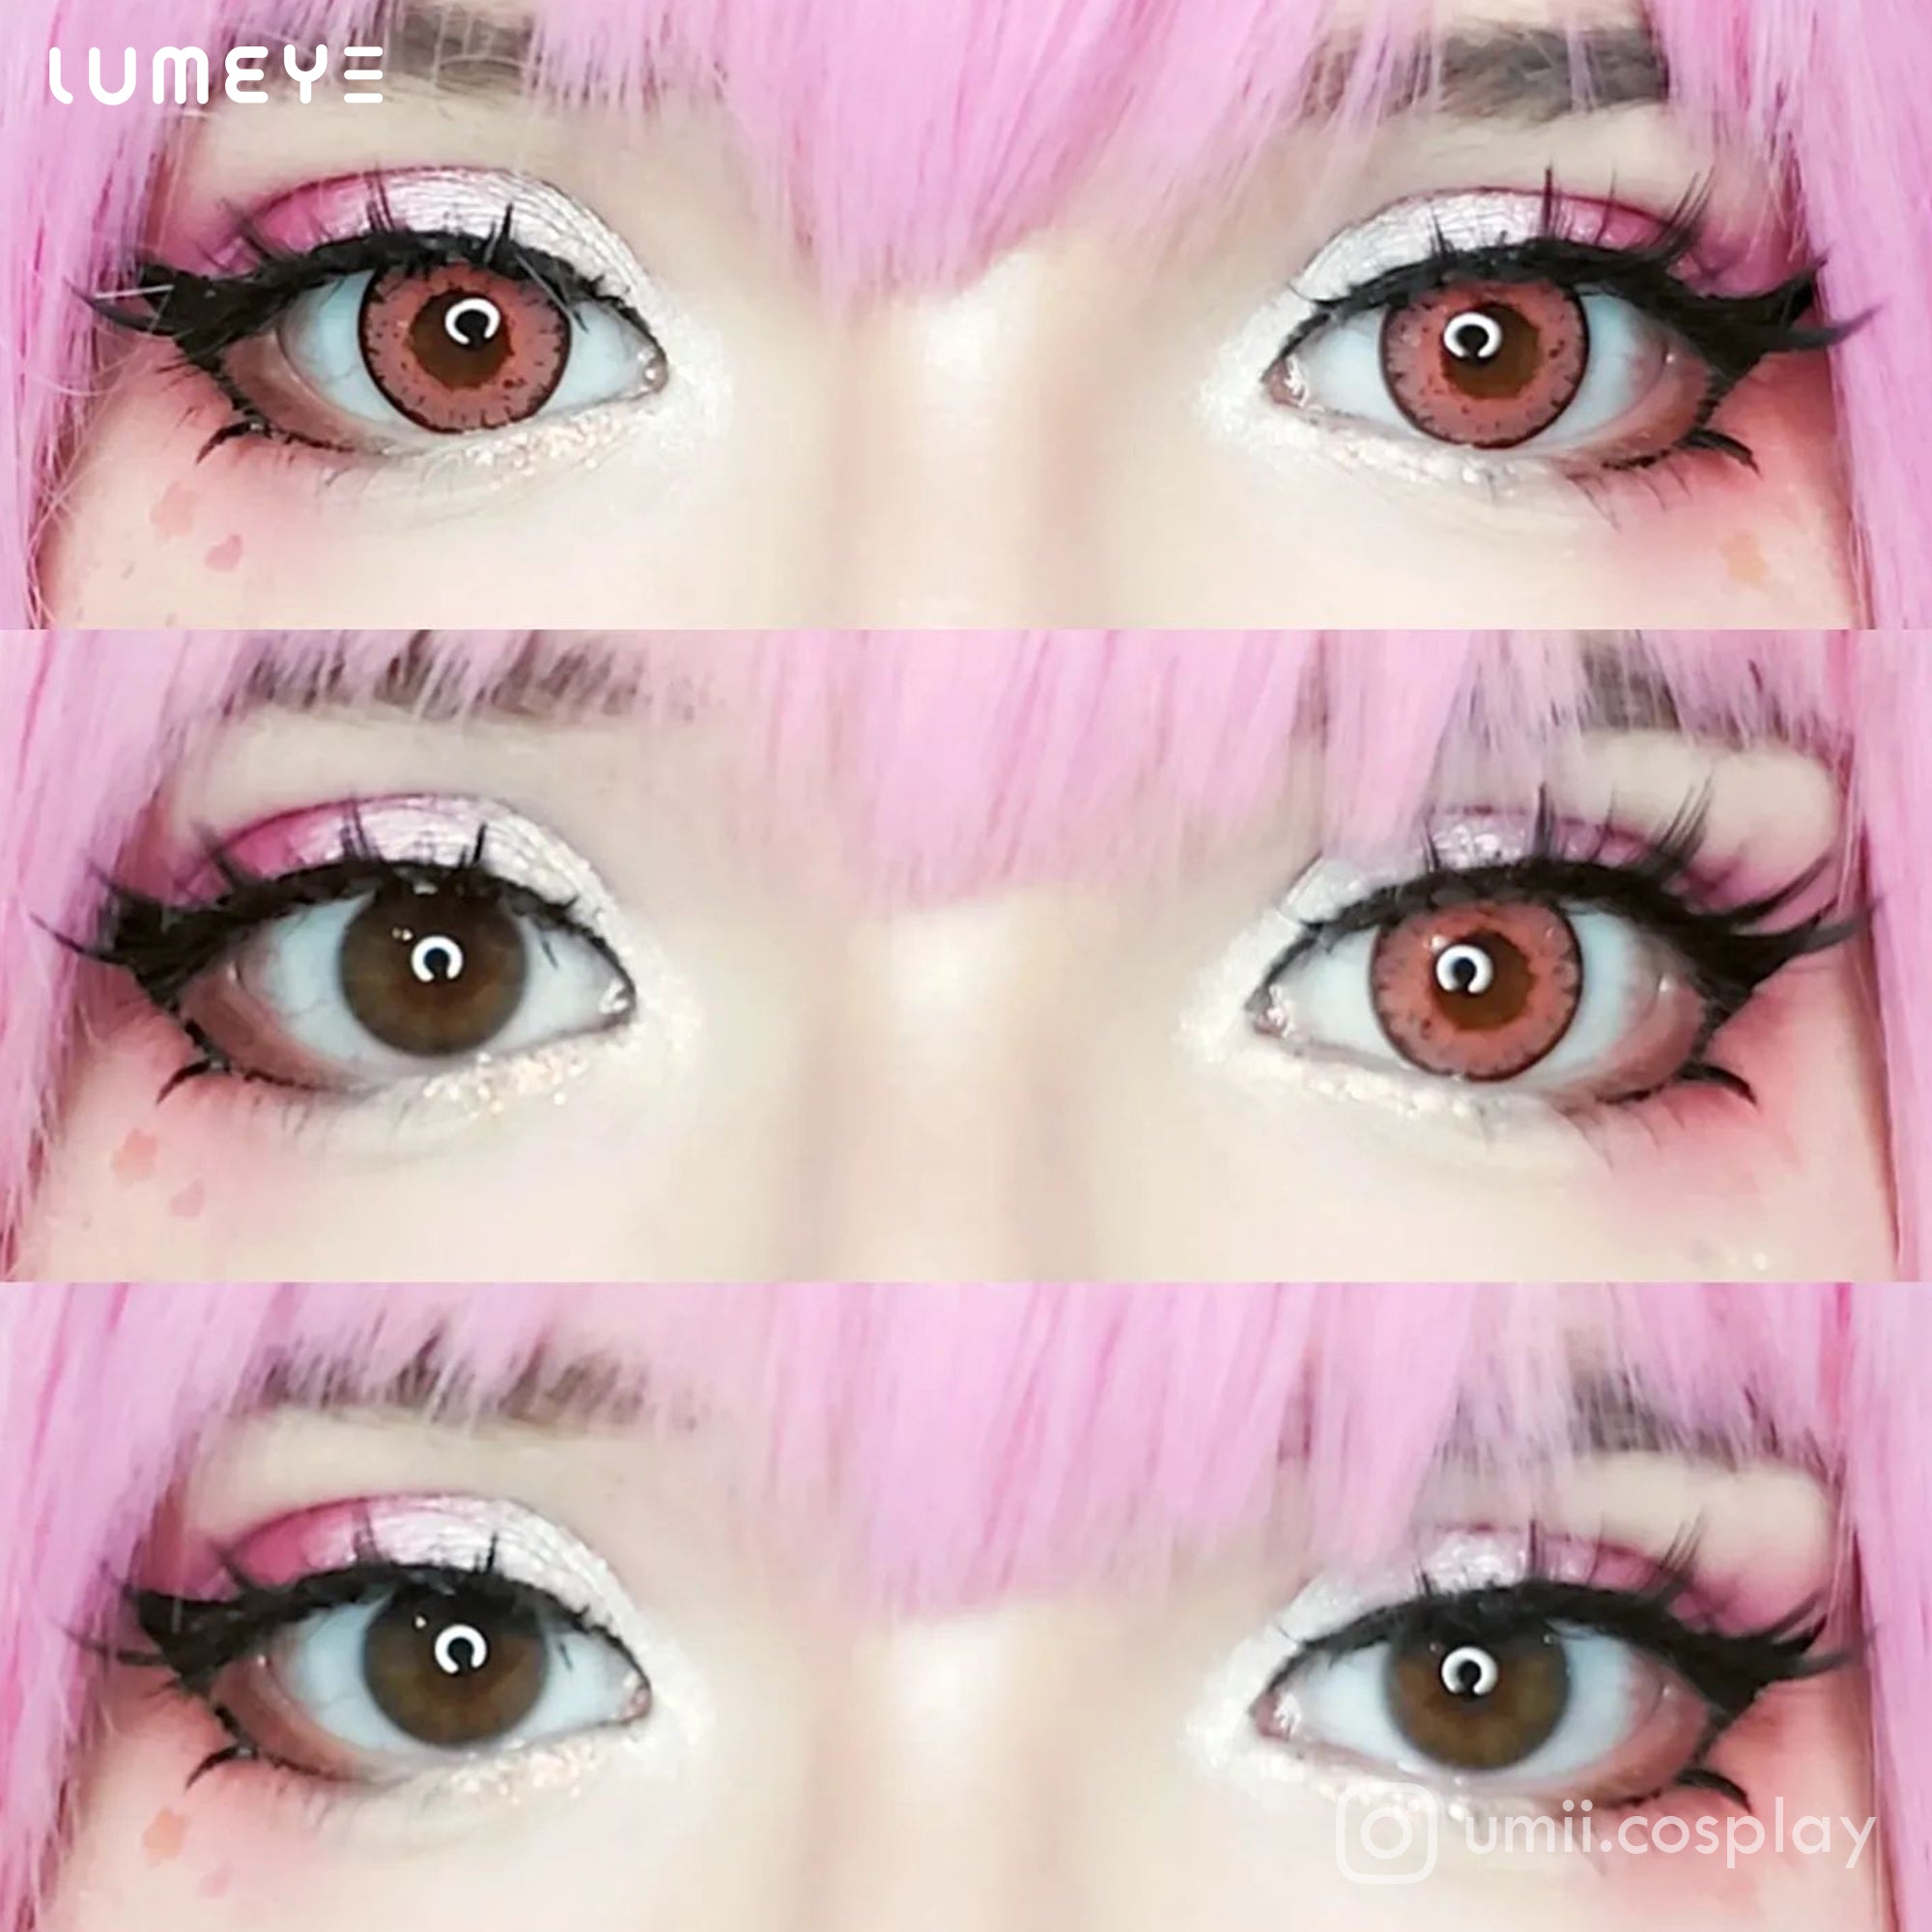 Best COLORED CONTACTS - LUMEYE Candy Peachy Pink Colored Contact Lenses - LUMEYE